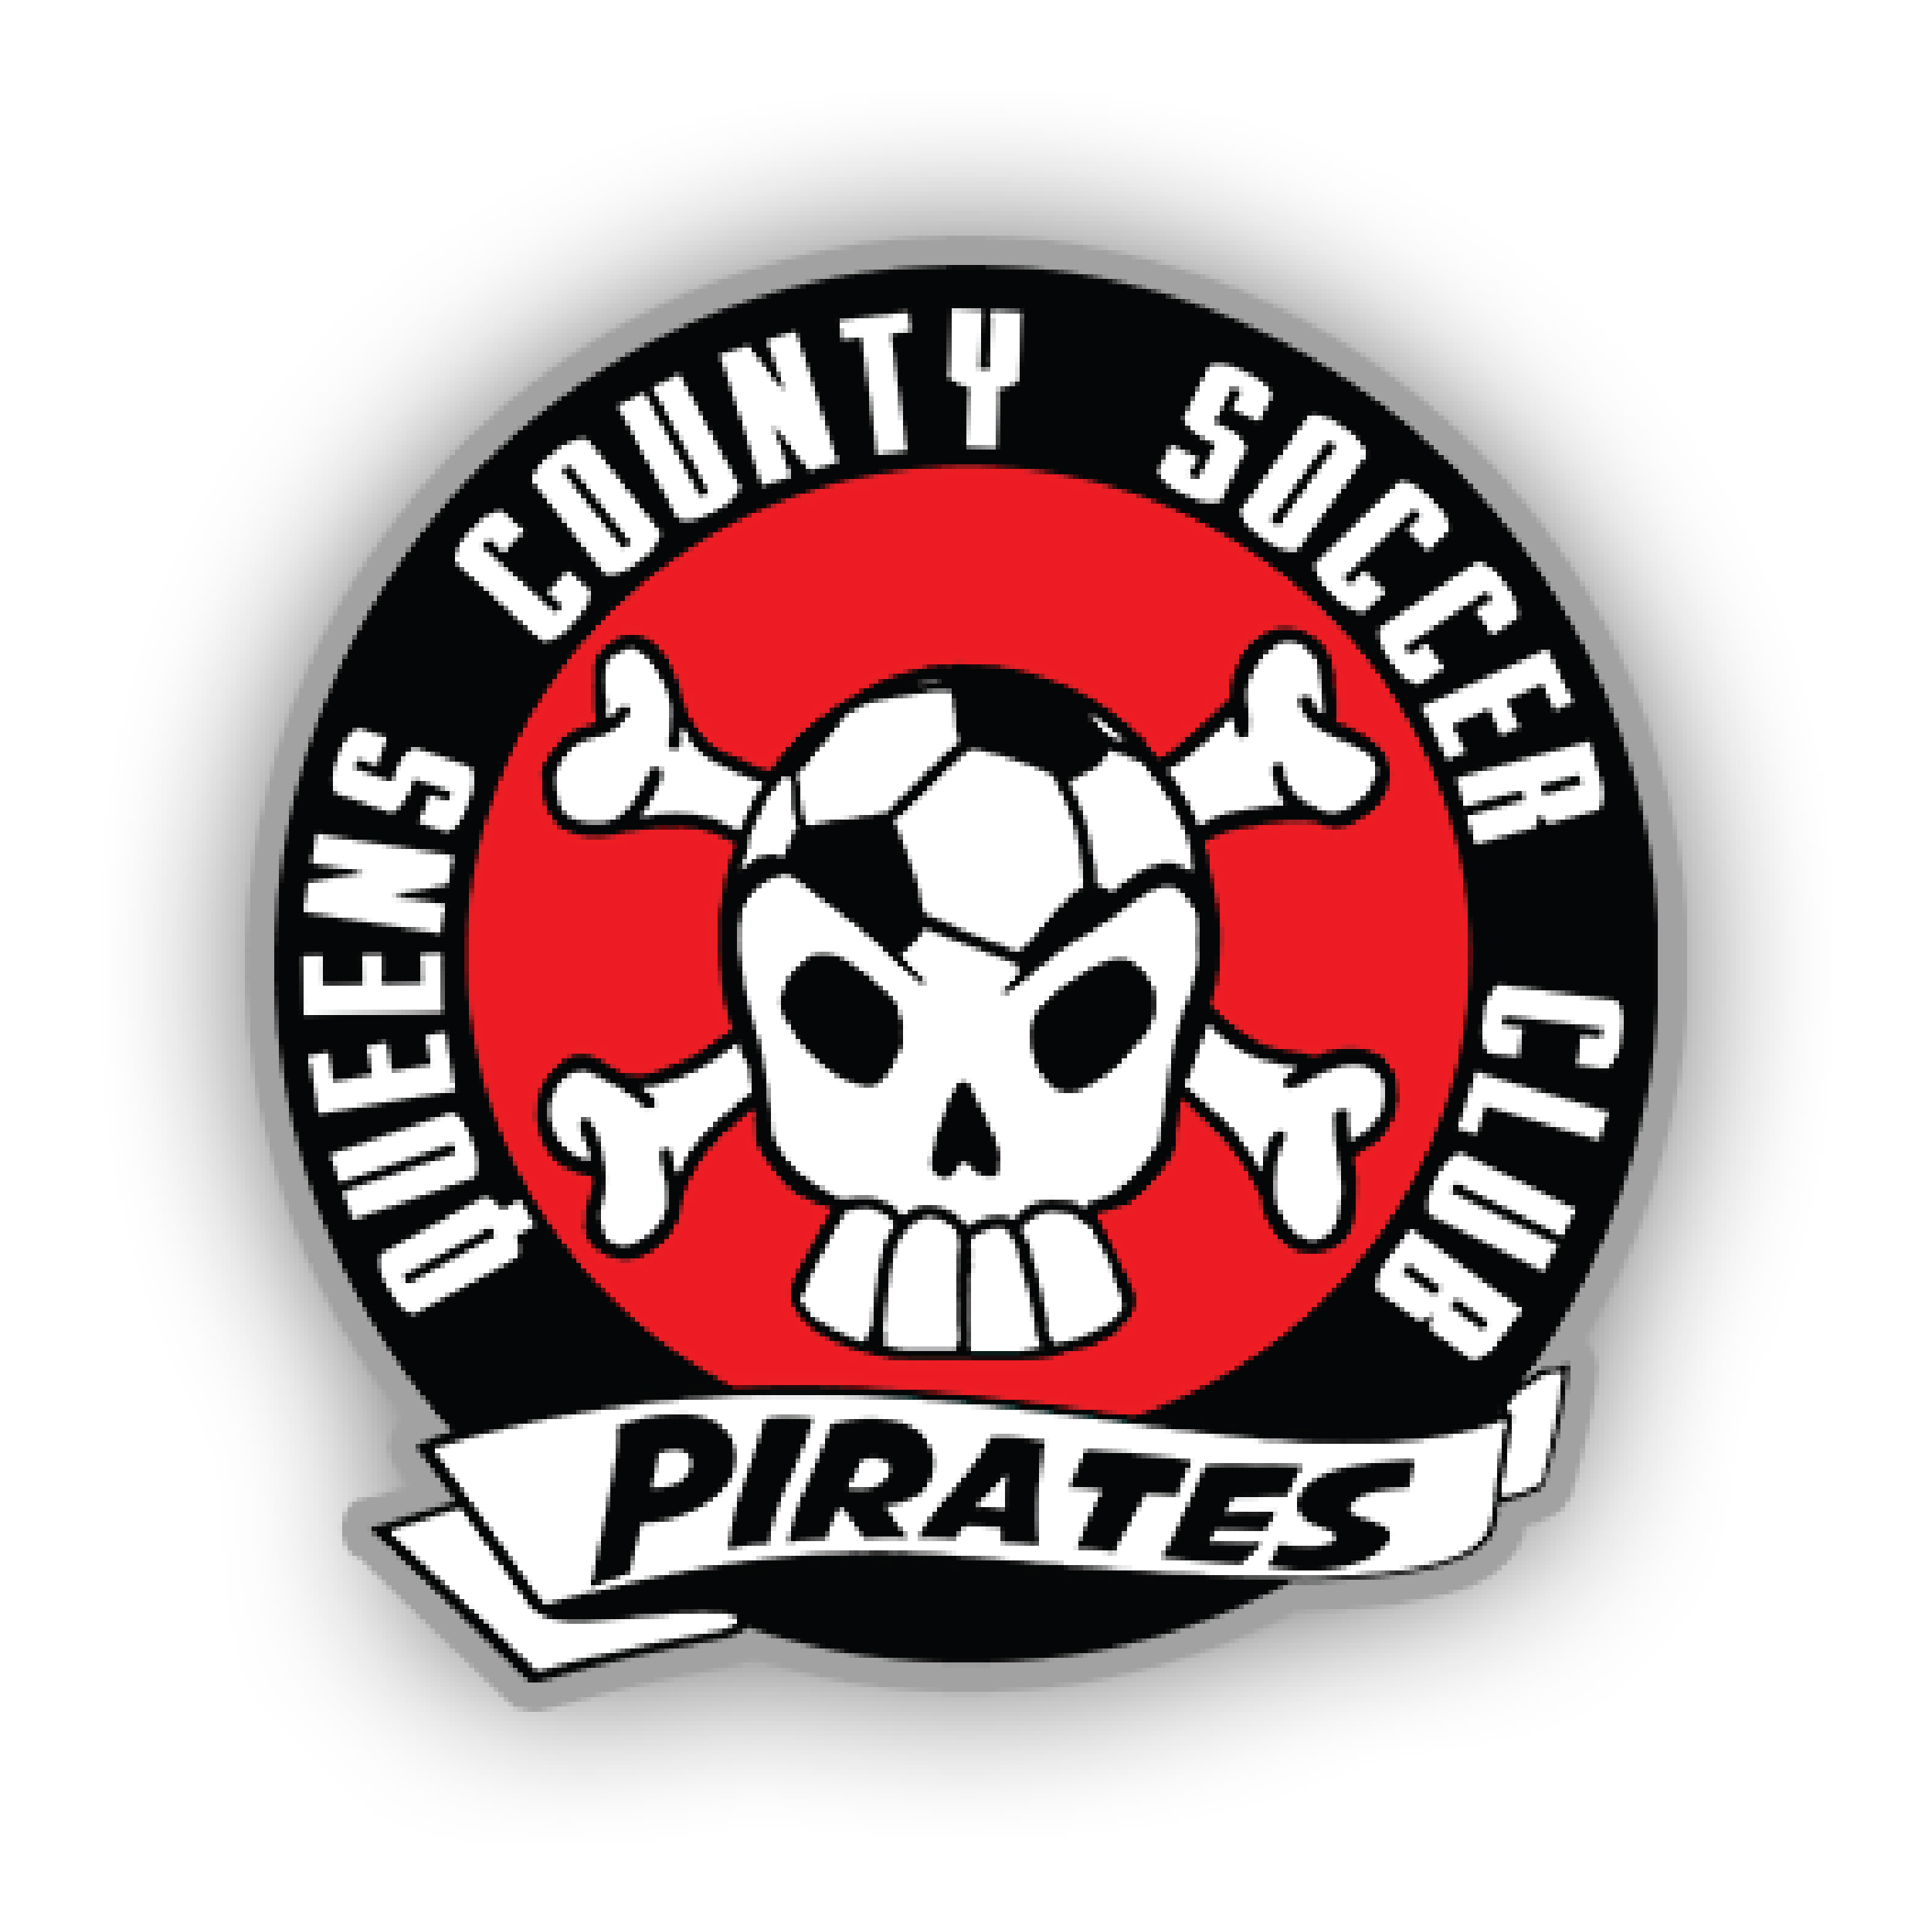 Queens County Soccer Club